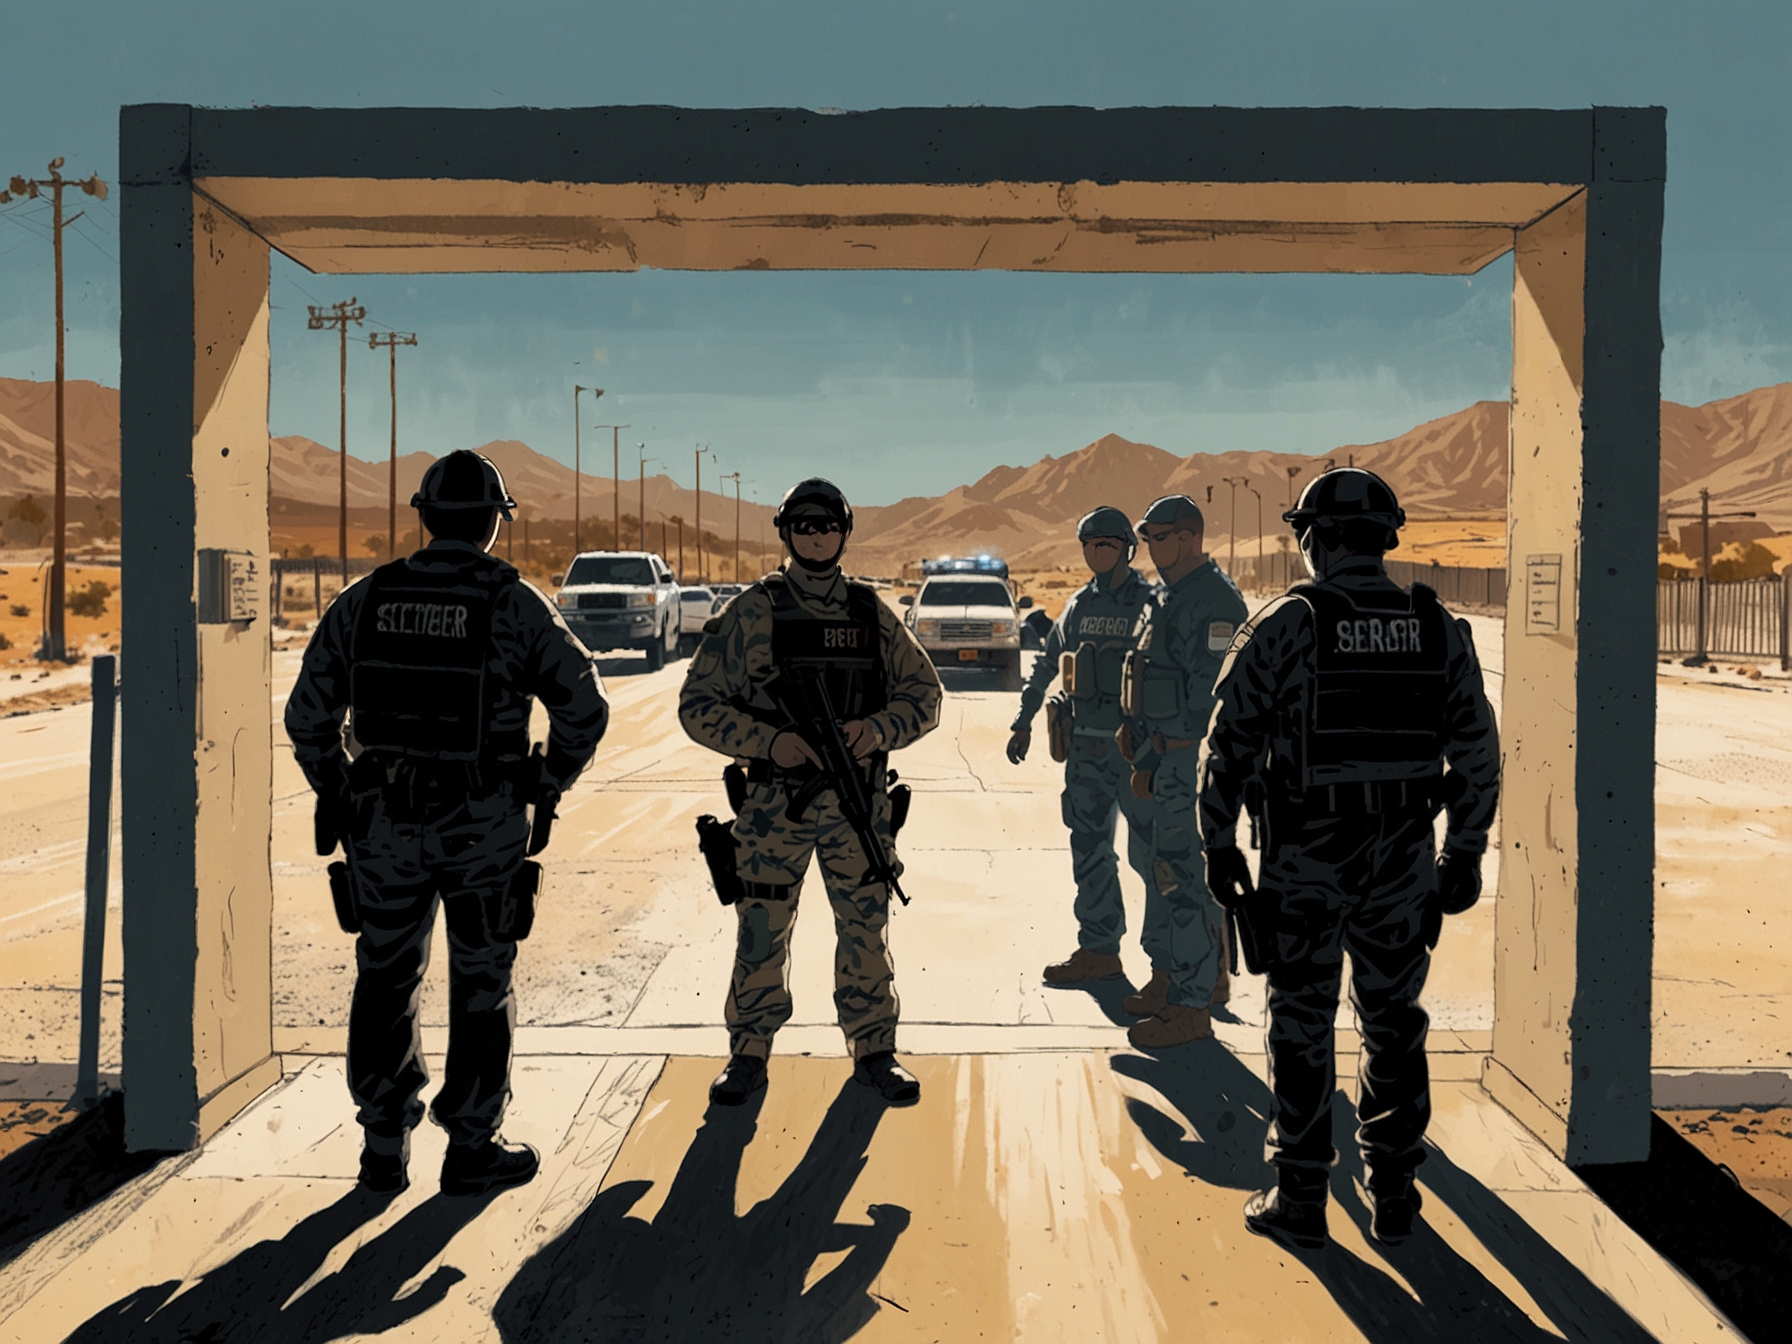 Image depicting border security personnel at a U.S. checkpoint, emphasizing the need for improved screening measures and advanced technology to detect potential threats at the border.